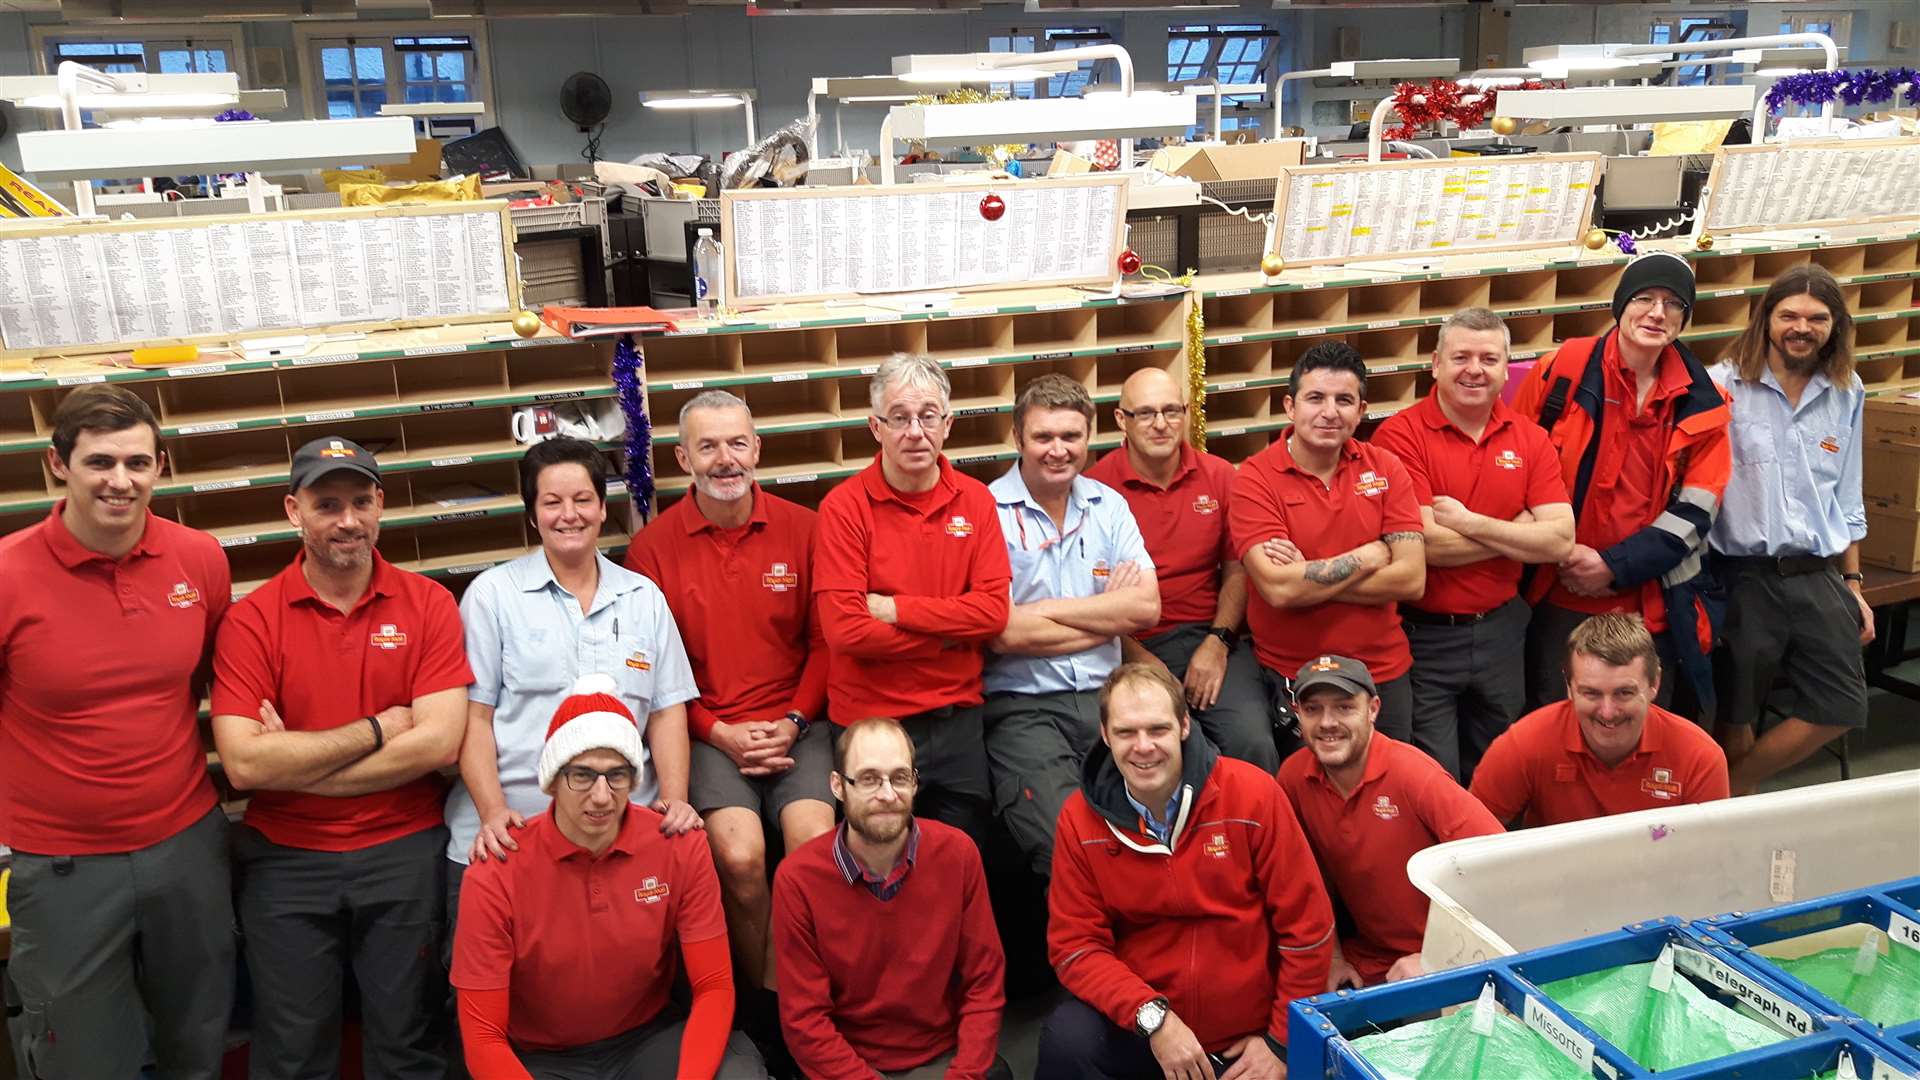 Royal Mail staff in Deal are starting work at 4.45am handling around 45,000 to 47,000 items a day, this Christmas